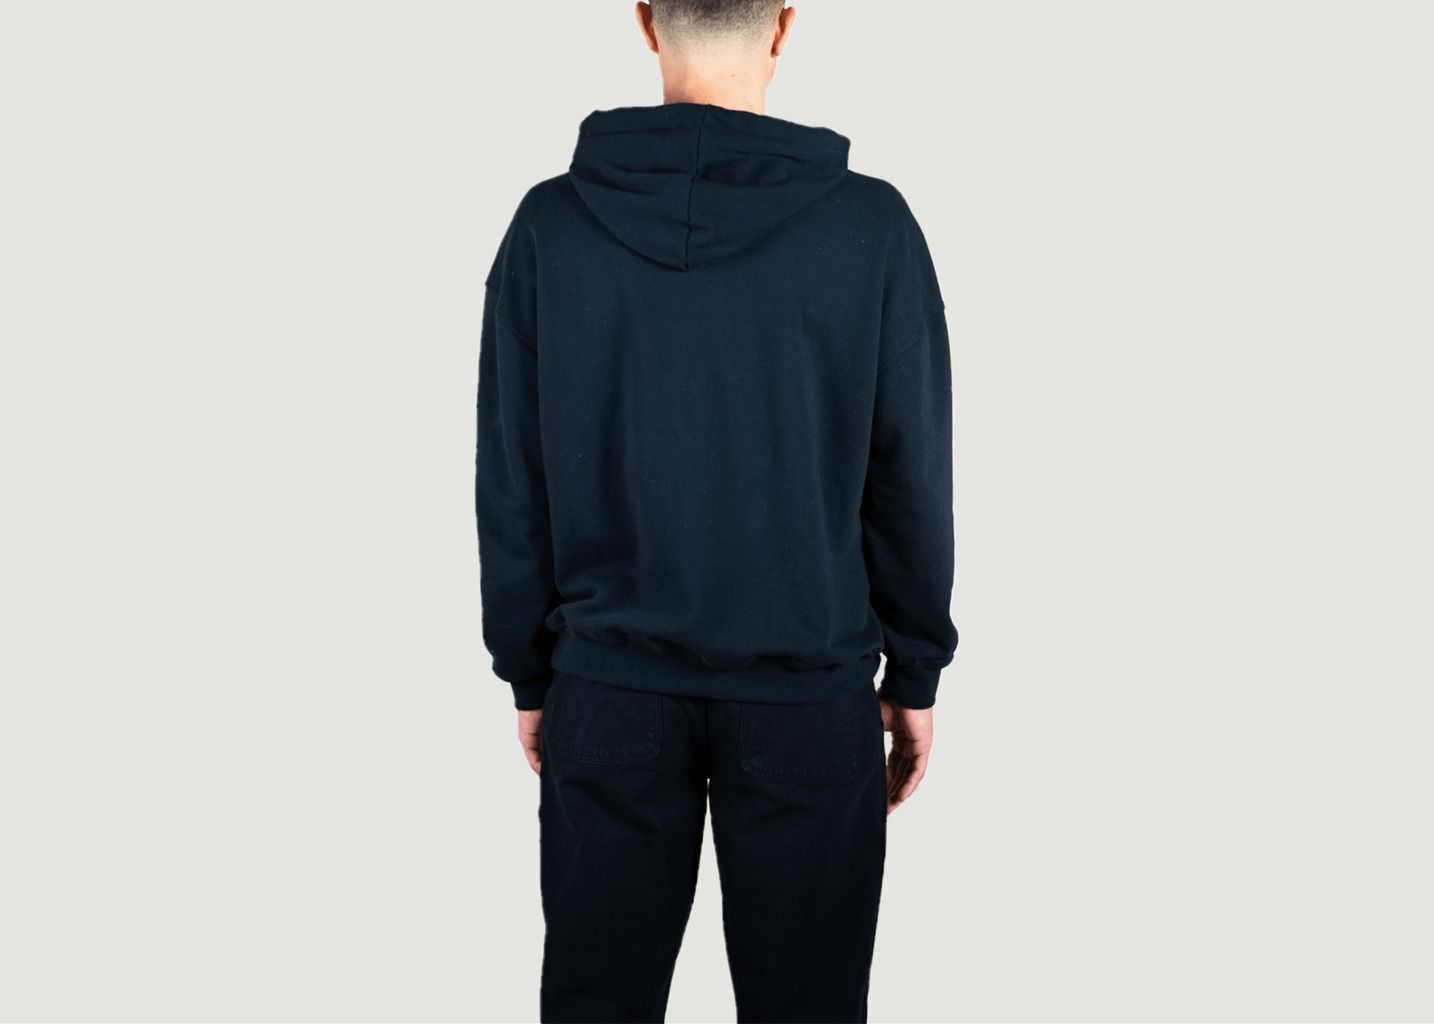 The embroidered hoodie - Hopaal